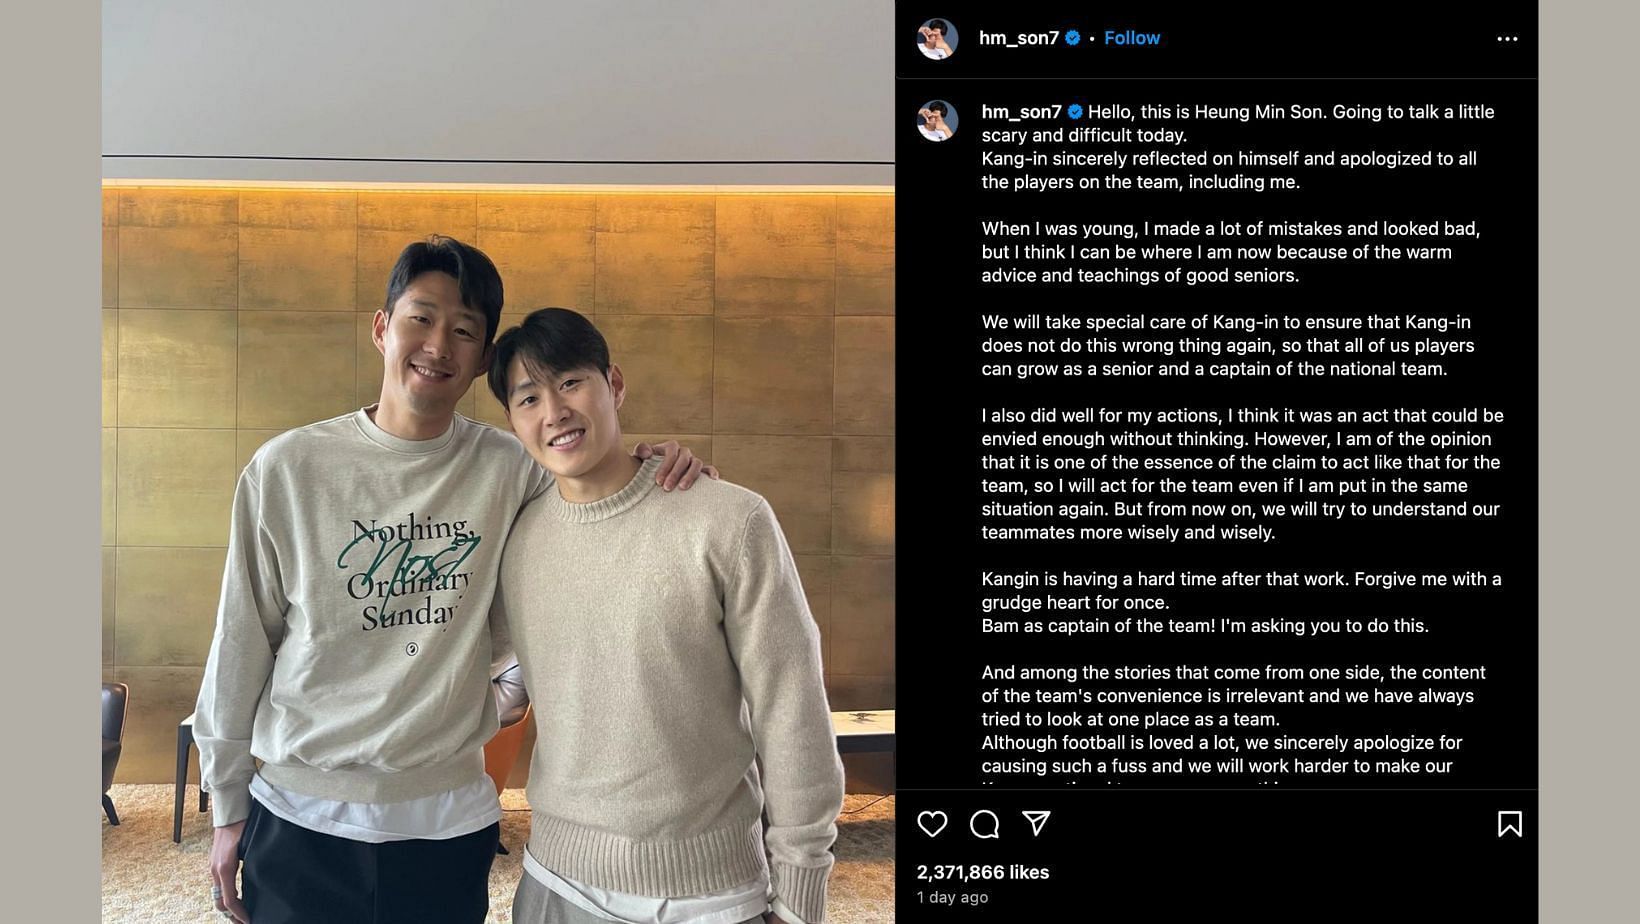 South Korean national team players Son Heung-min and Lee Kang-in displaying a united front. (Image via Instagram/@hm_son7)